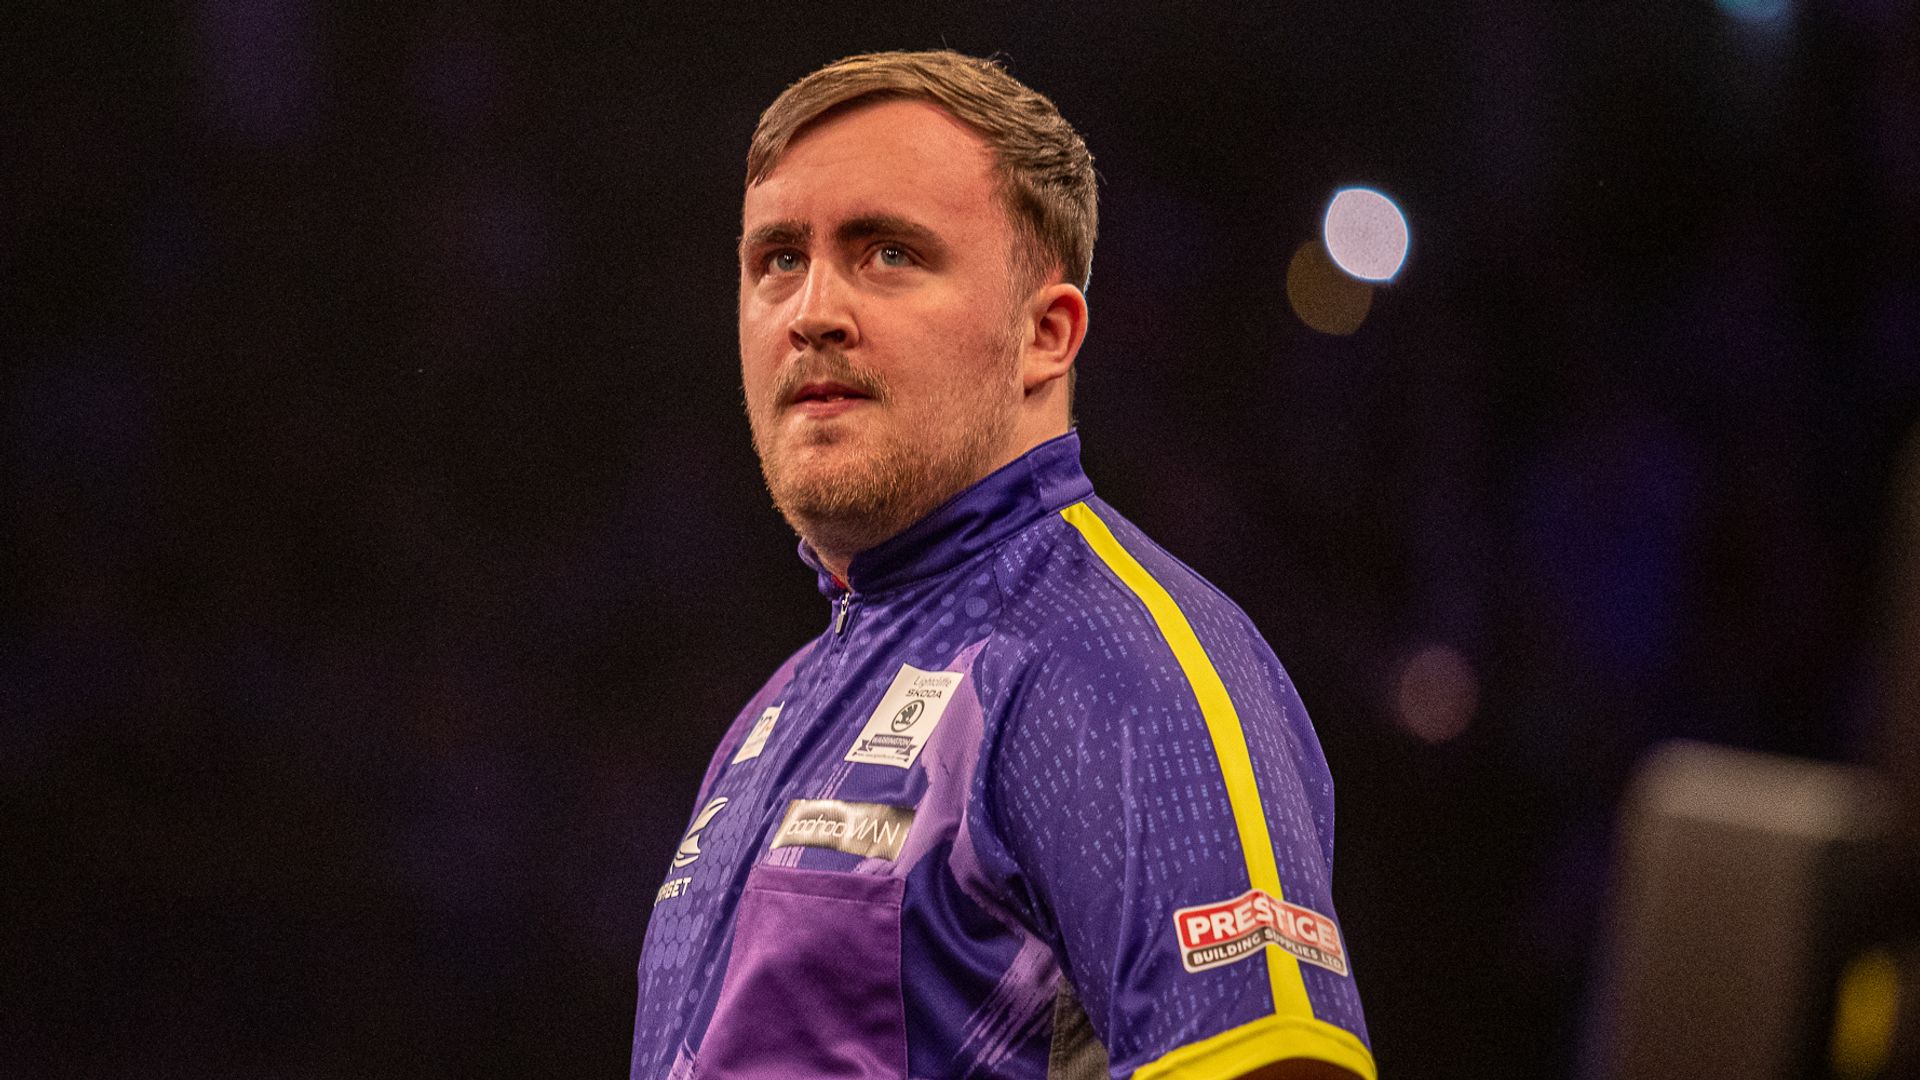 Littler fires nine-darter and wins on Players Championship debut